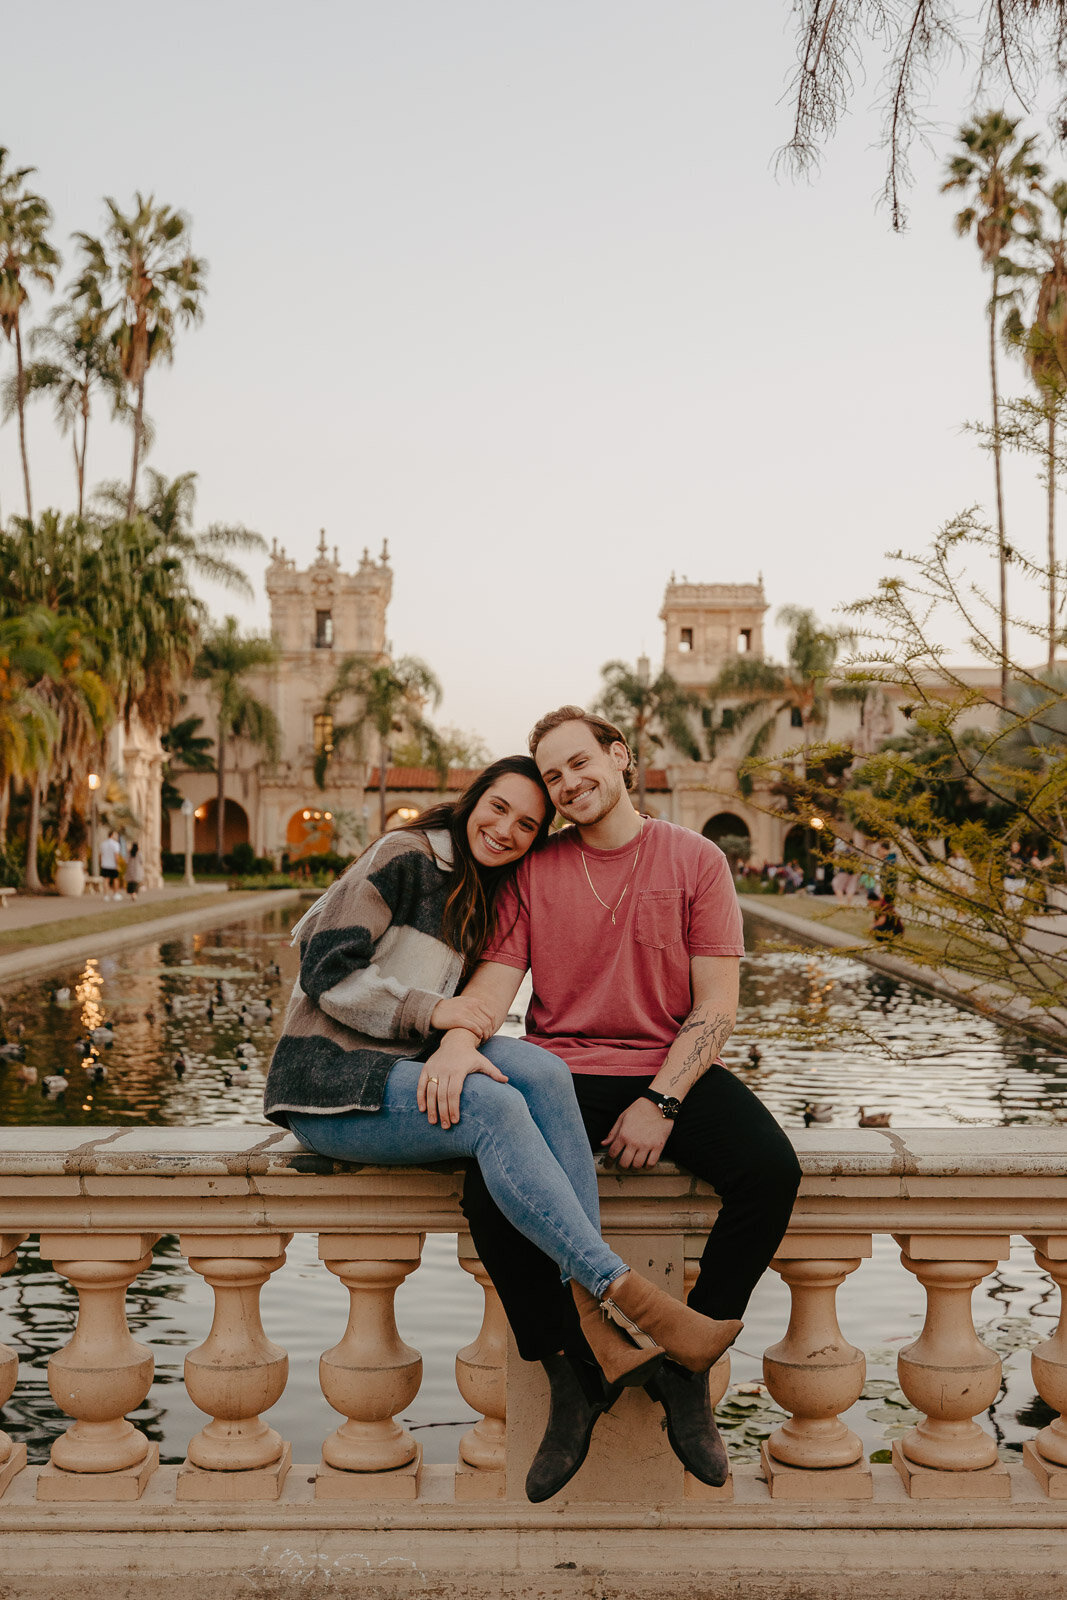 Lexx-Creative-Balboa-Park-With-Dogs-Engagement-23